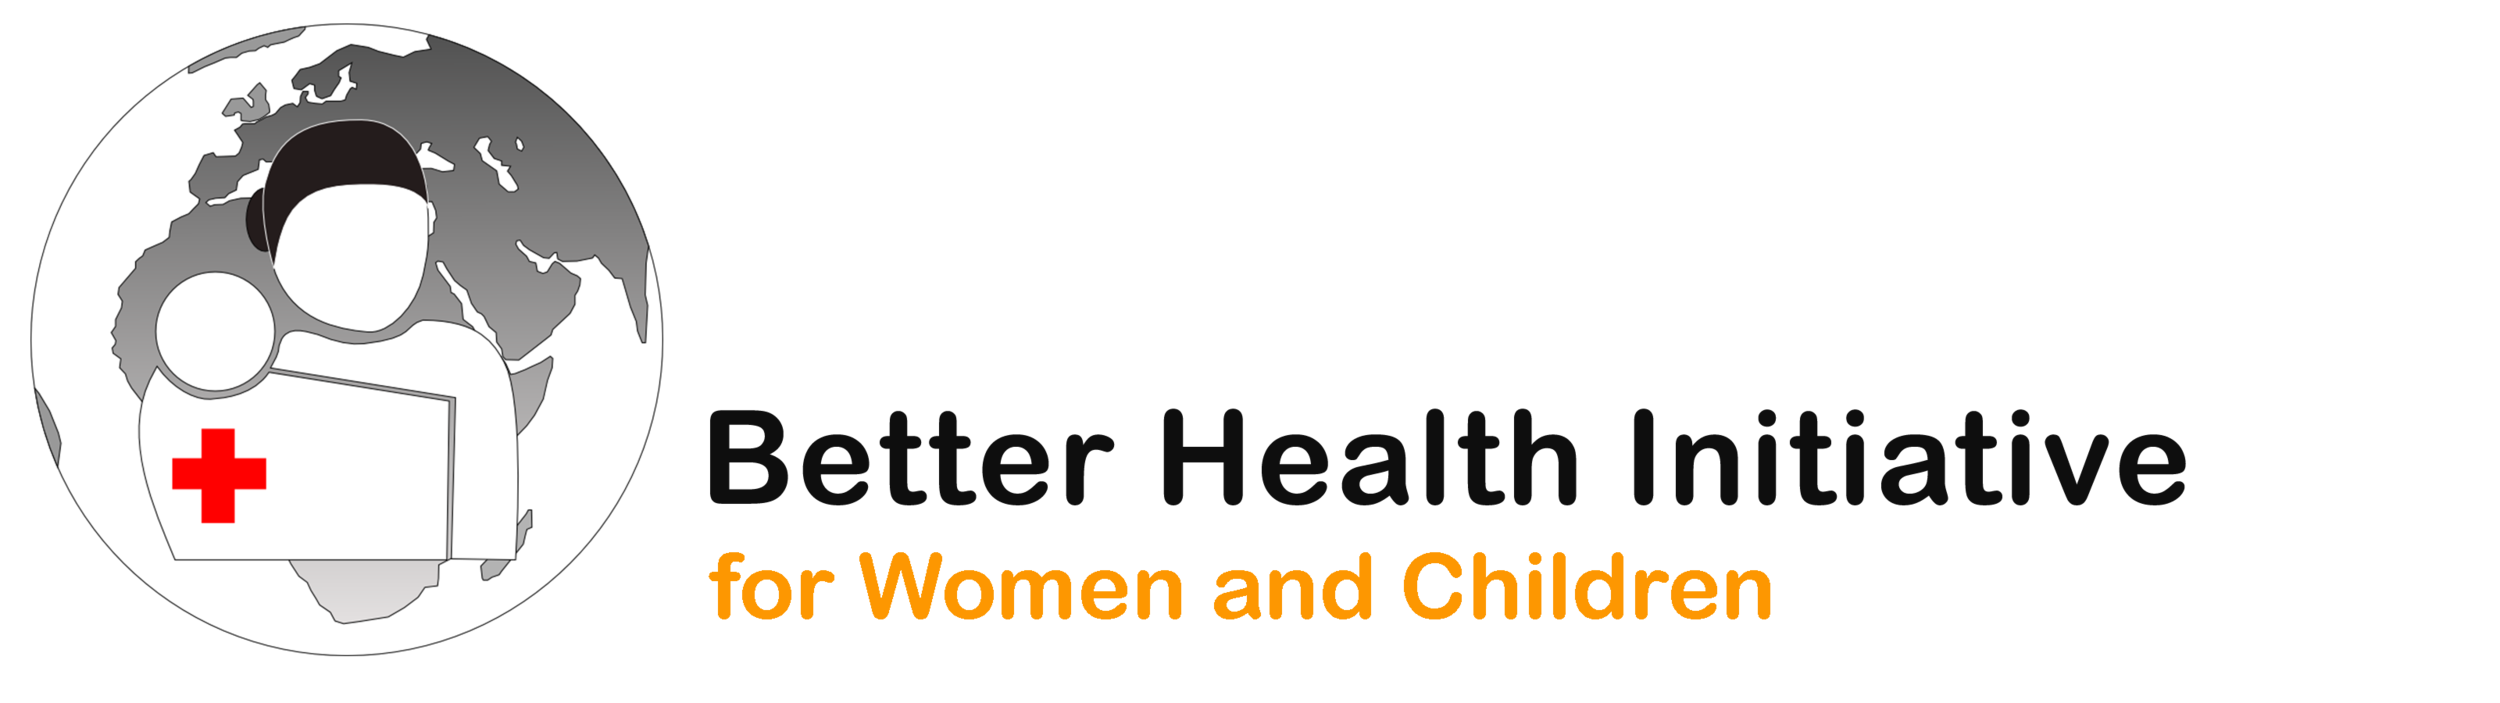 Better Healthcare Initiative for Women and Children